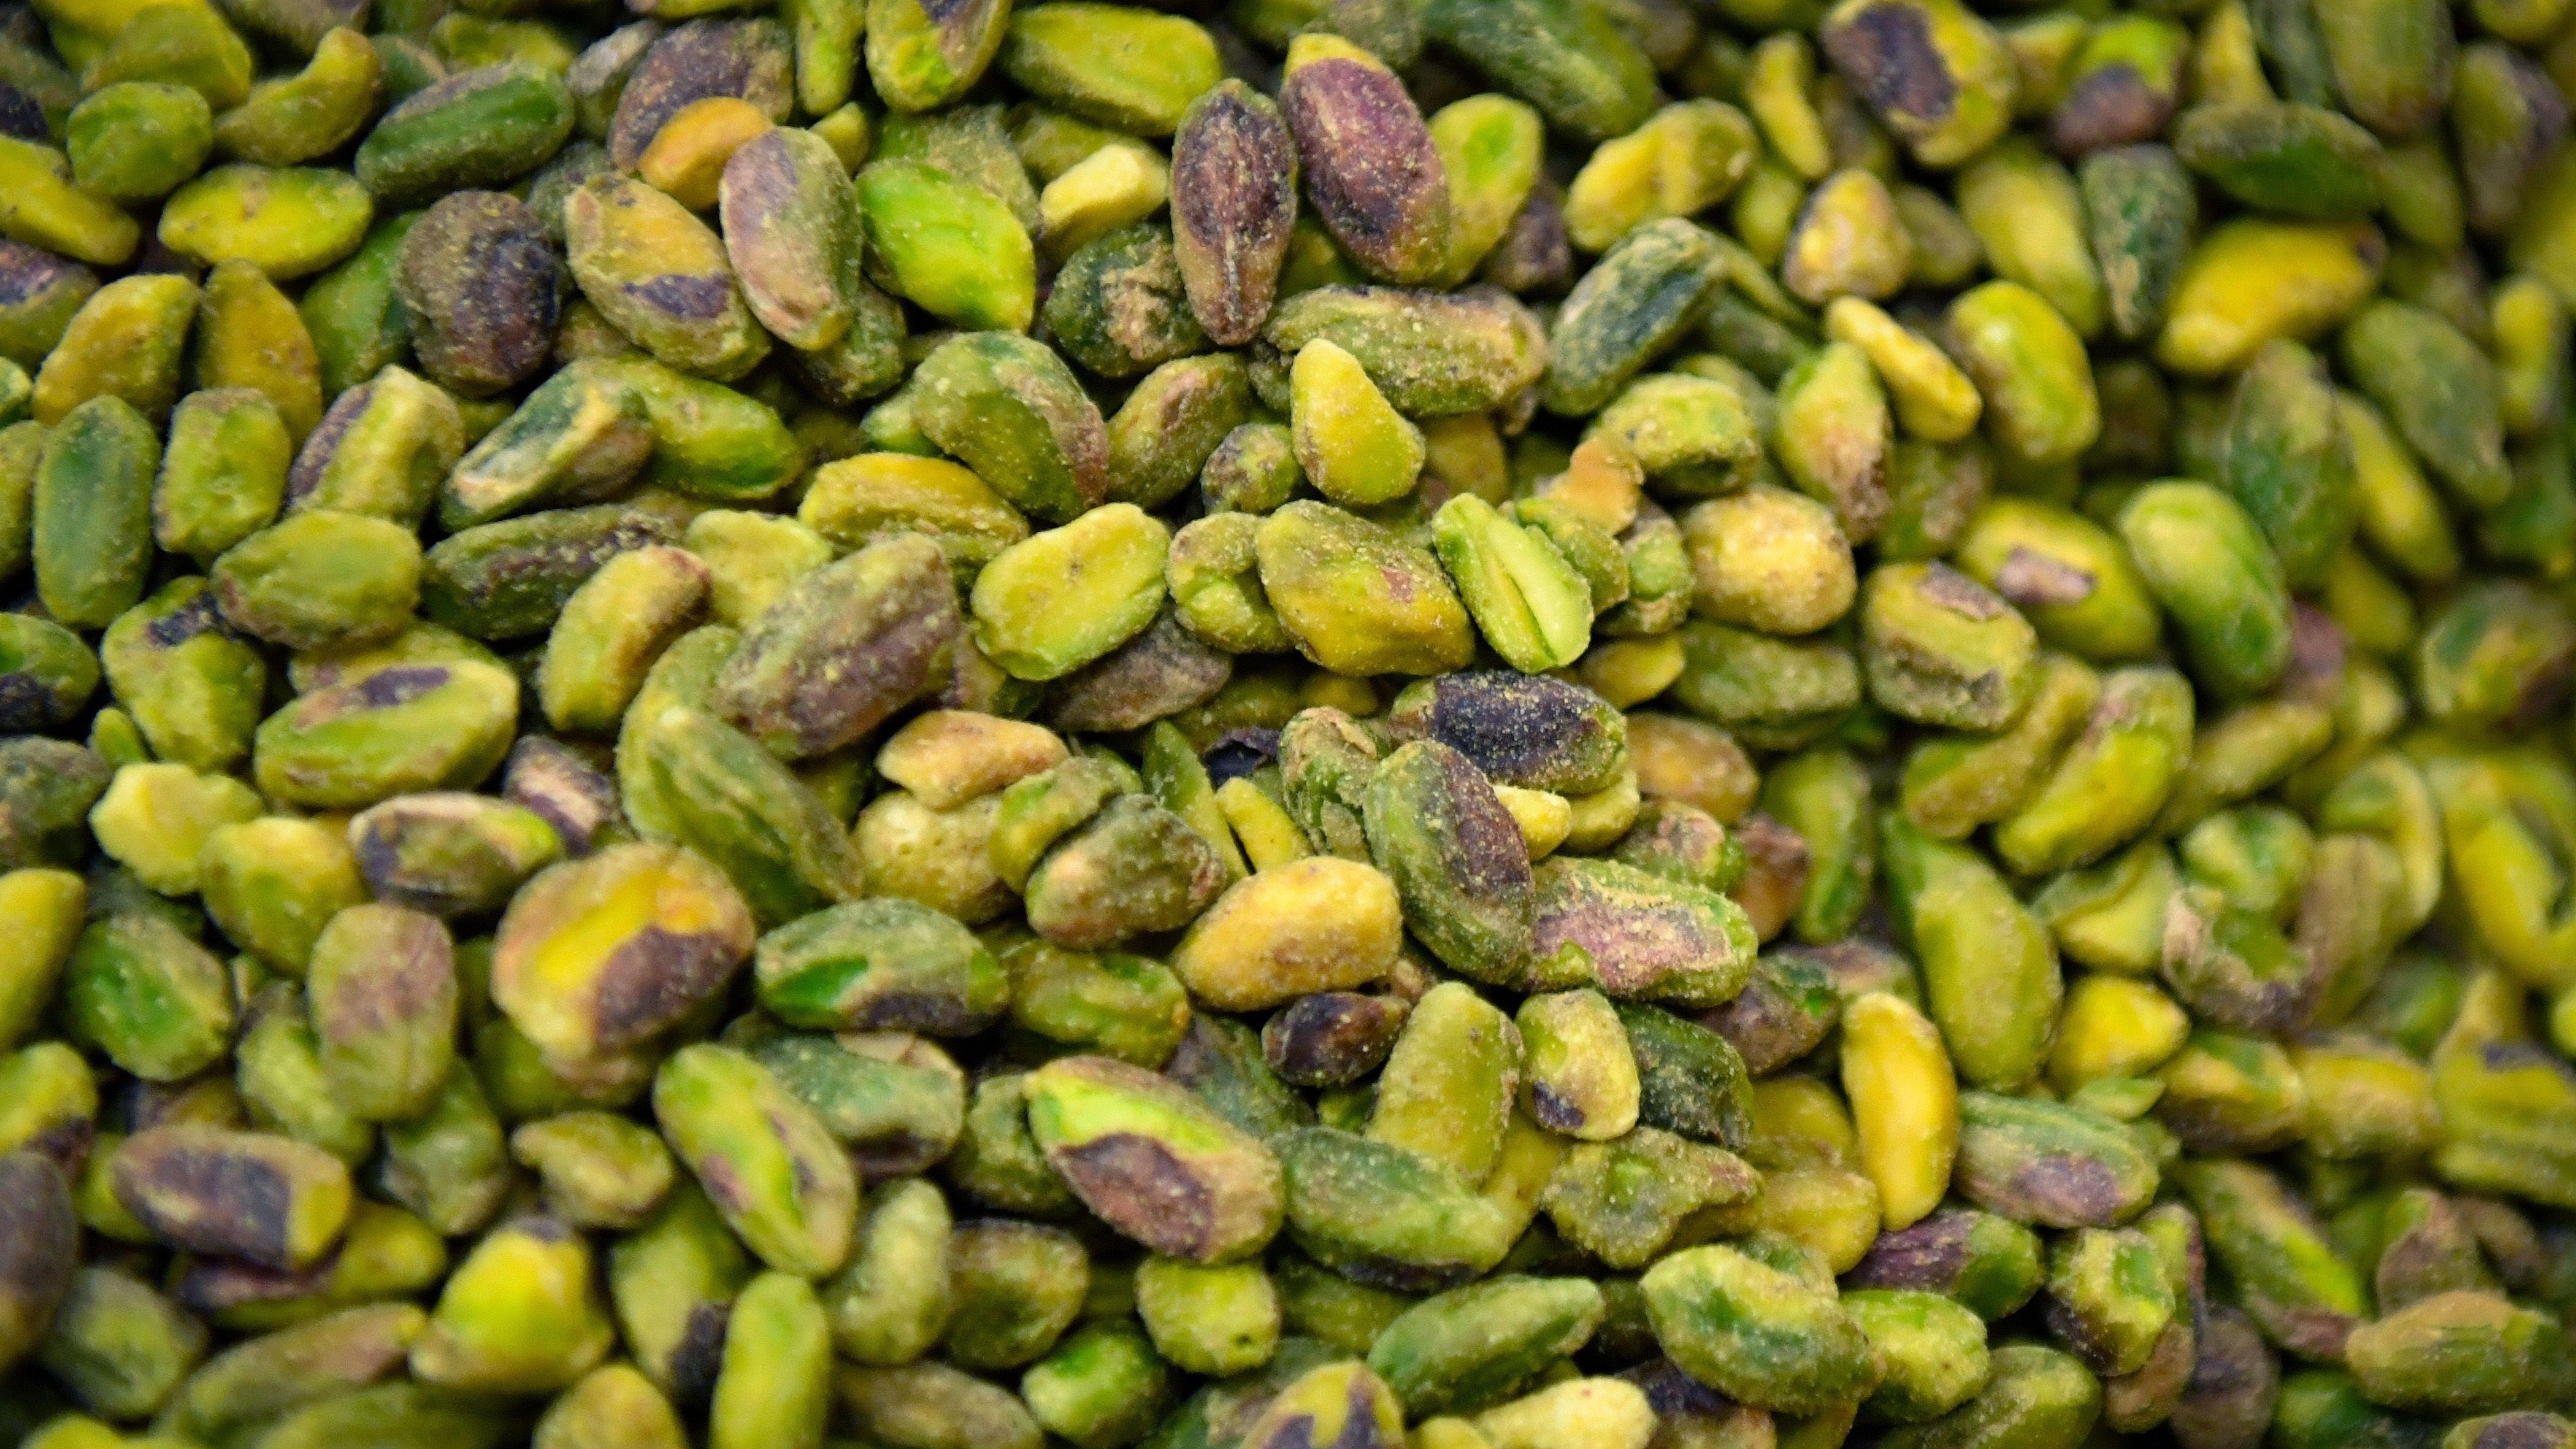 California trucker steals 42,000 pounds of pistachios, leads to discovery of possible nut-smuggling ring